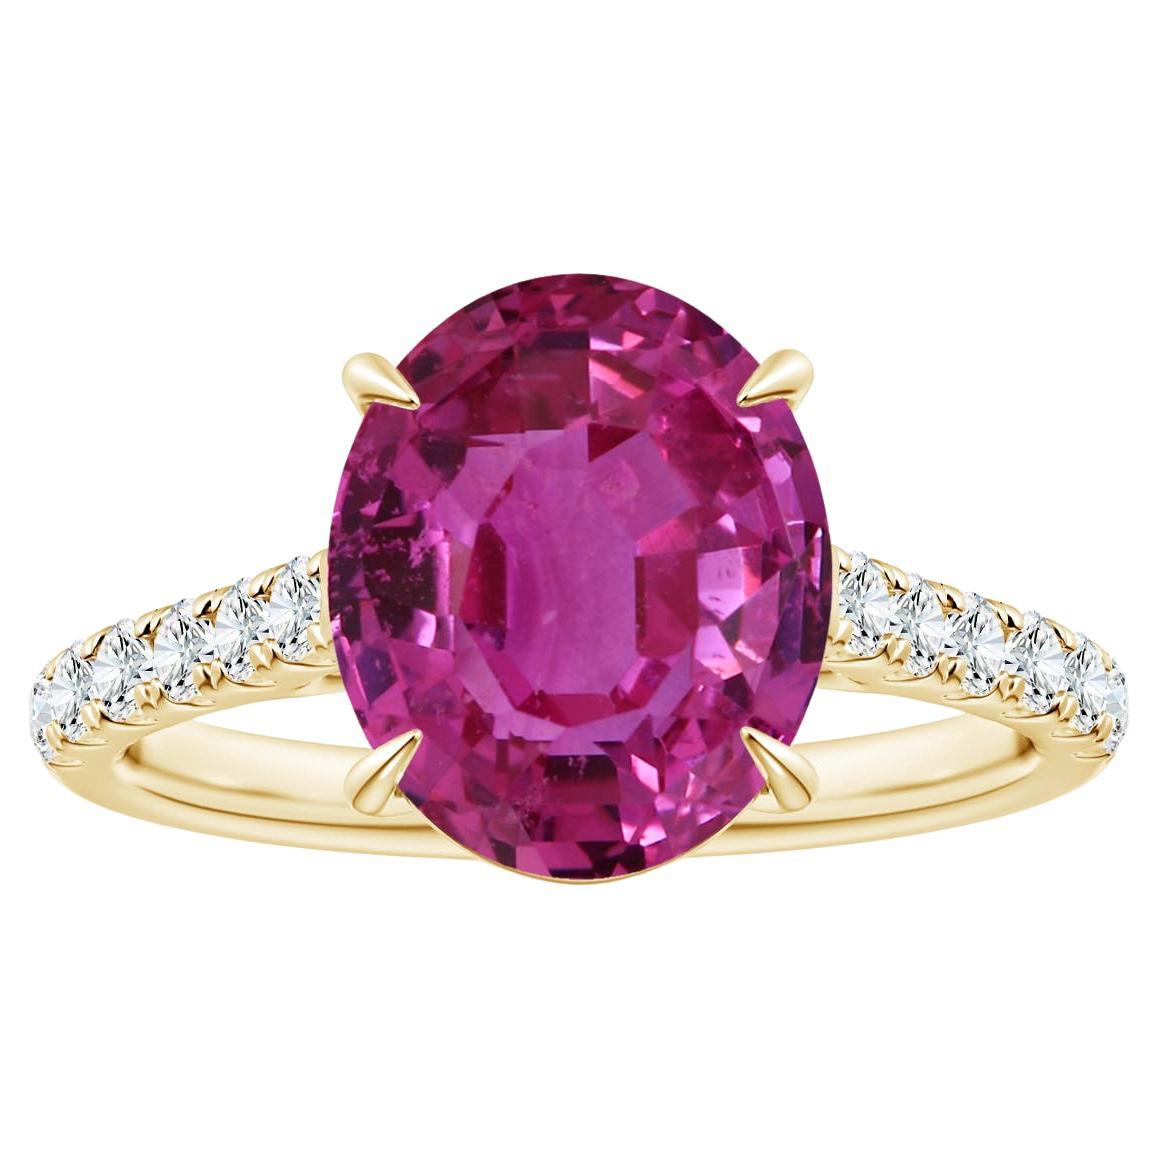 For Sale:  ANGARA Claw-Set GIA Certified Pink Sapphire Ring in Yellow Gold with Diamonds